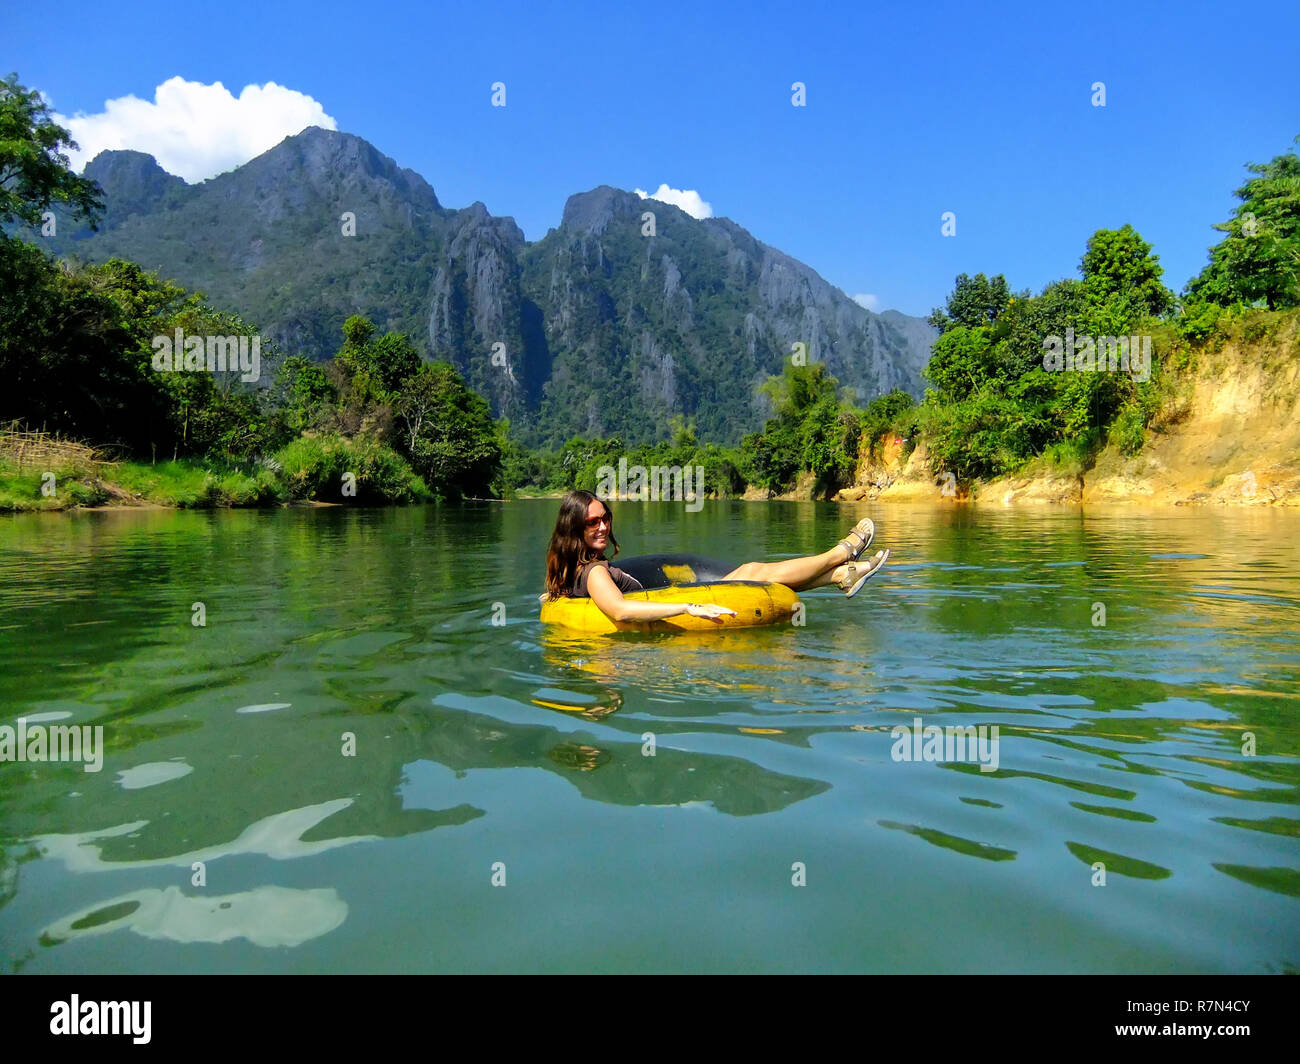 Tourist going down Nam Song River in a tube surrounded by karst scenery in Vang Vieng, Laos. Tubing is a popular tourist activity in Vang Vieng. Stock Photo